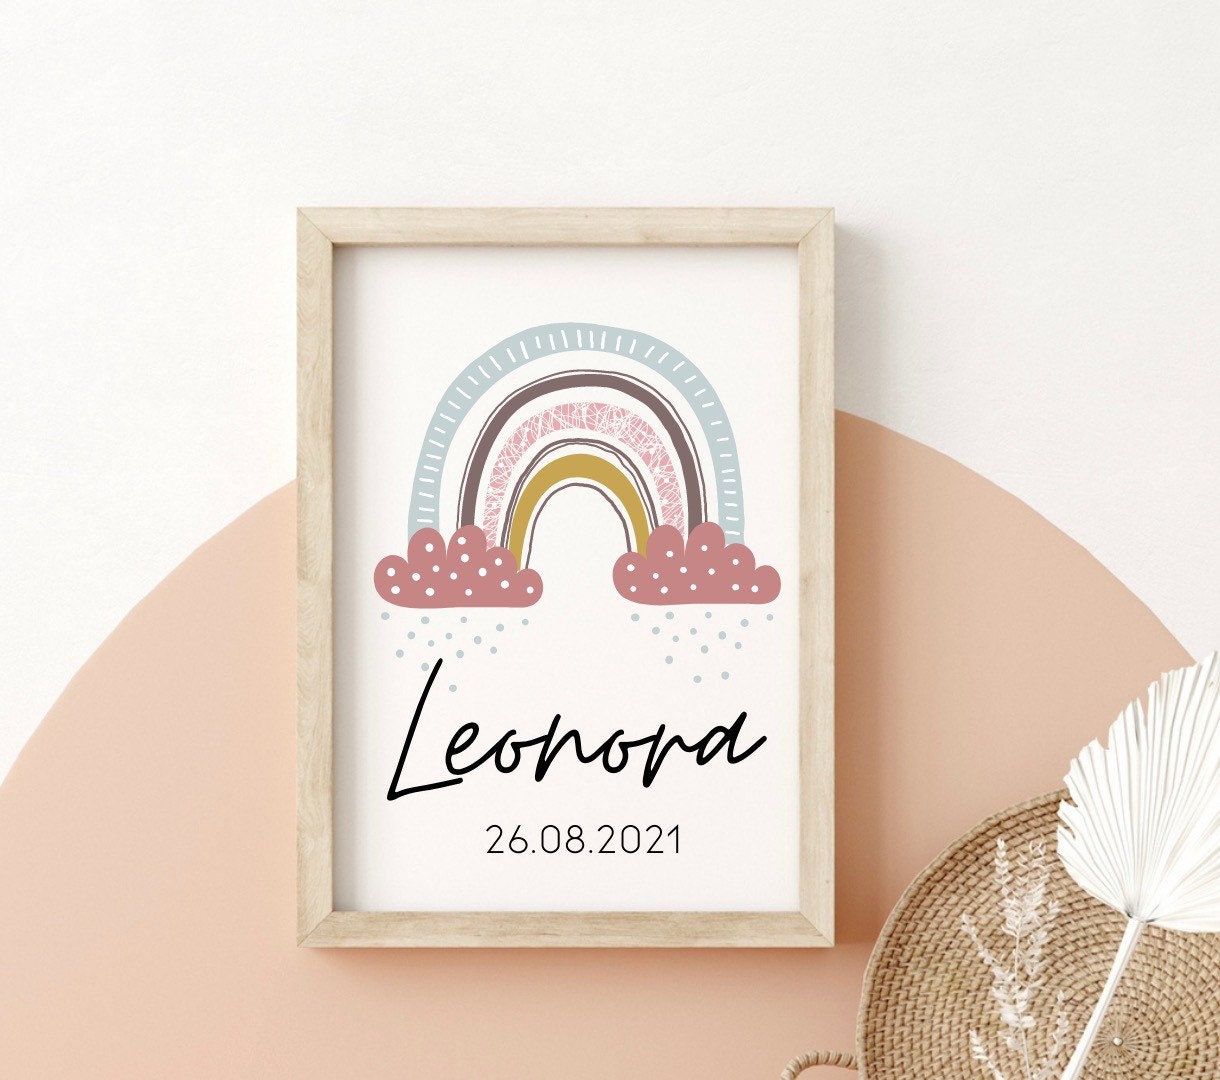 Personalised baby name and birthdate print with neutral rainbow design for neutral coloured nursery or baby bedroom. Newborn baby gifts 2021